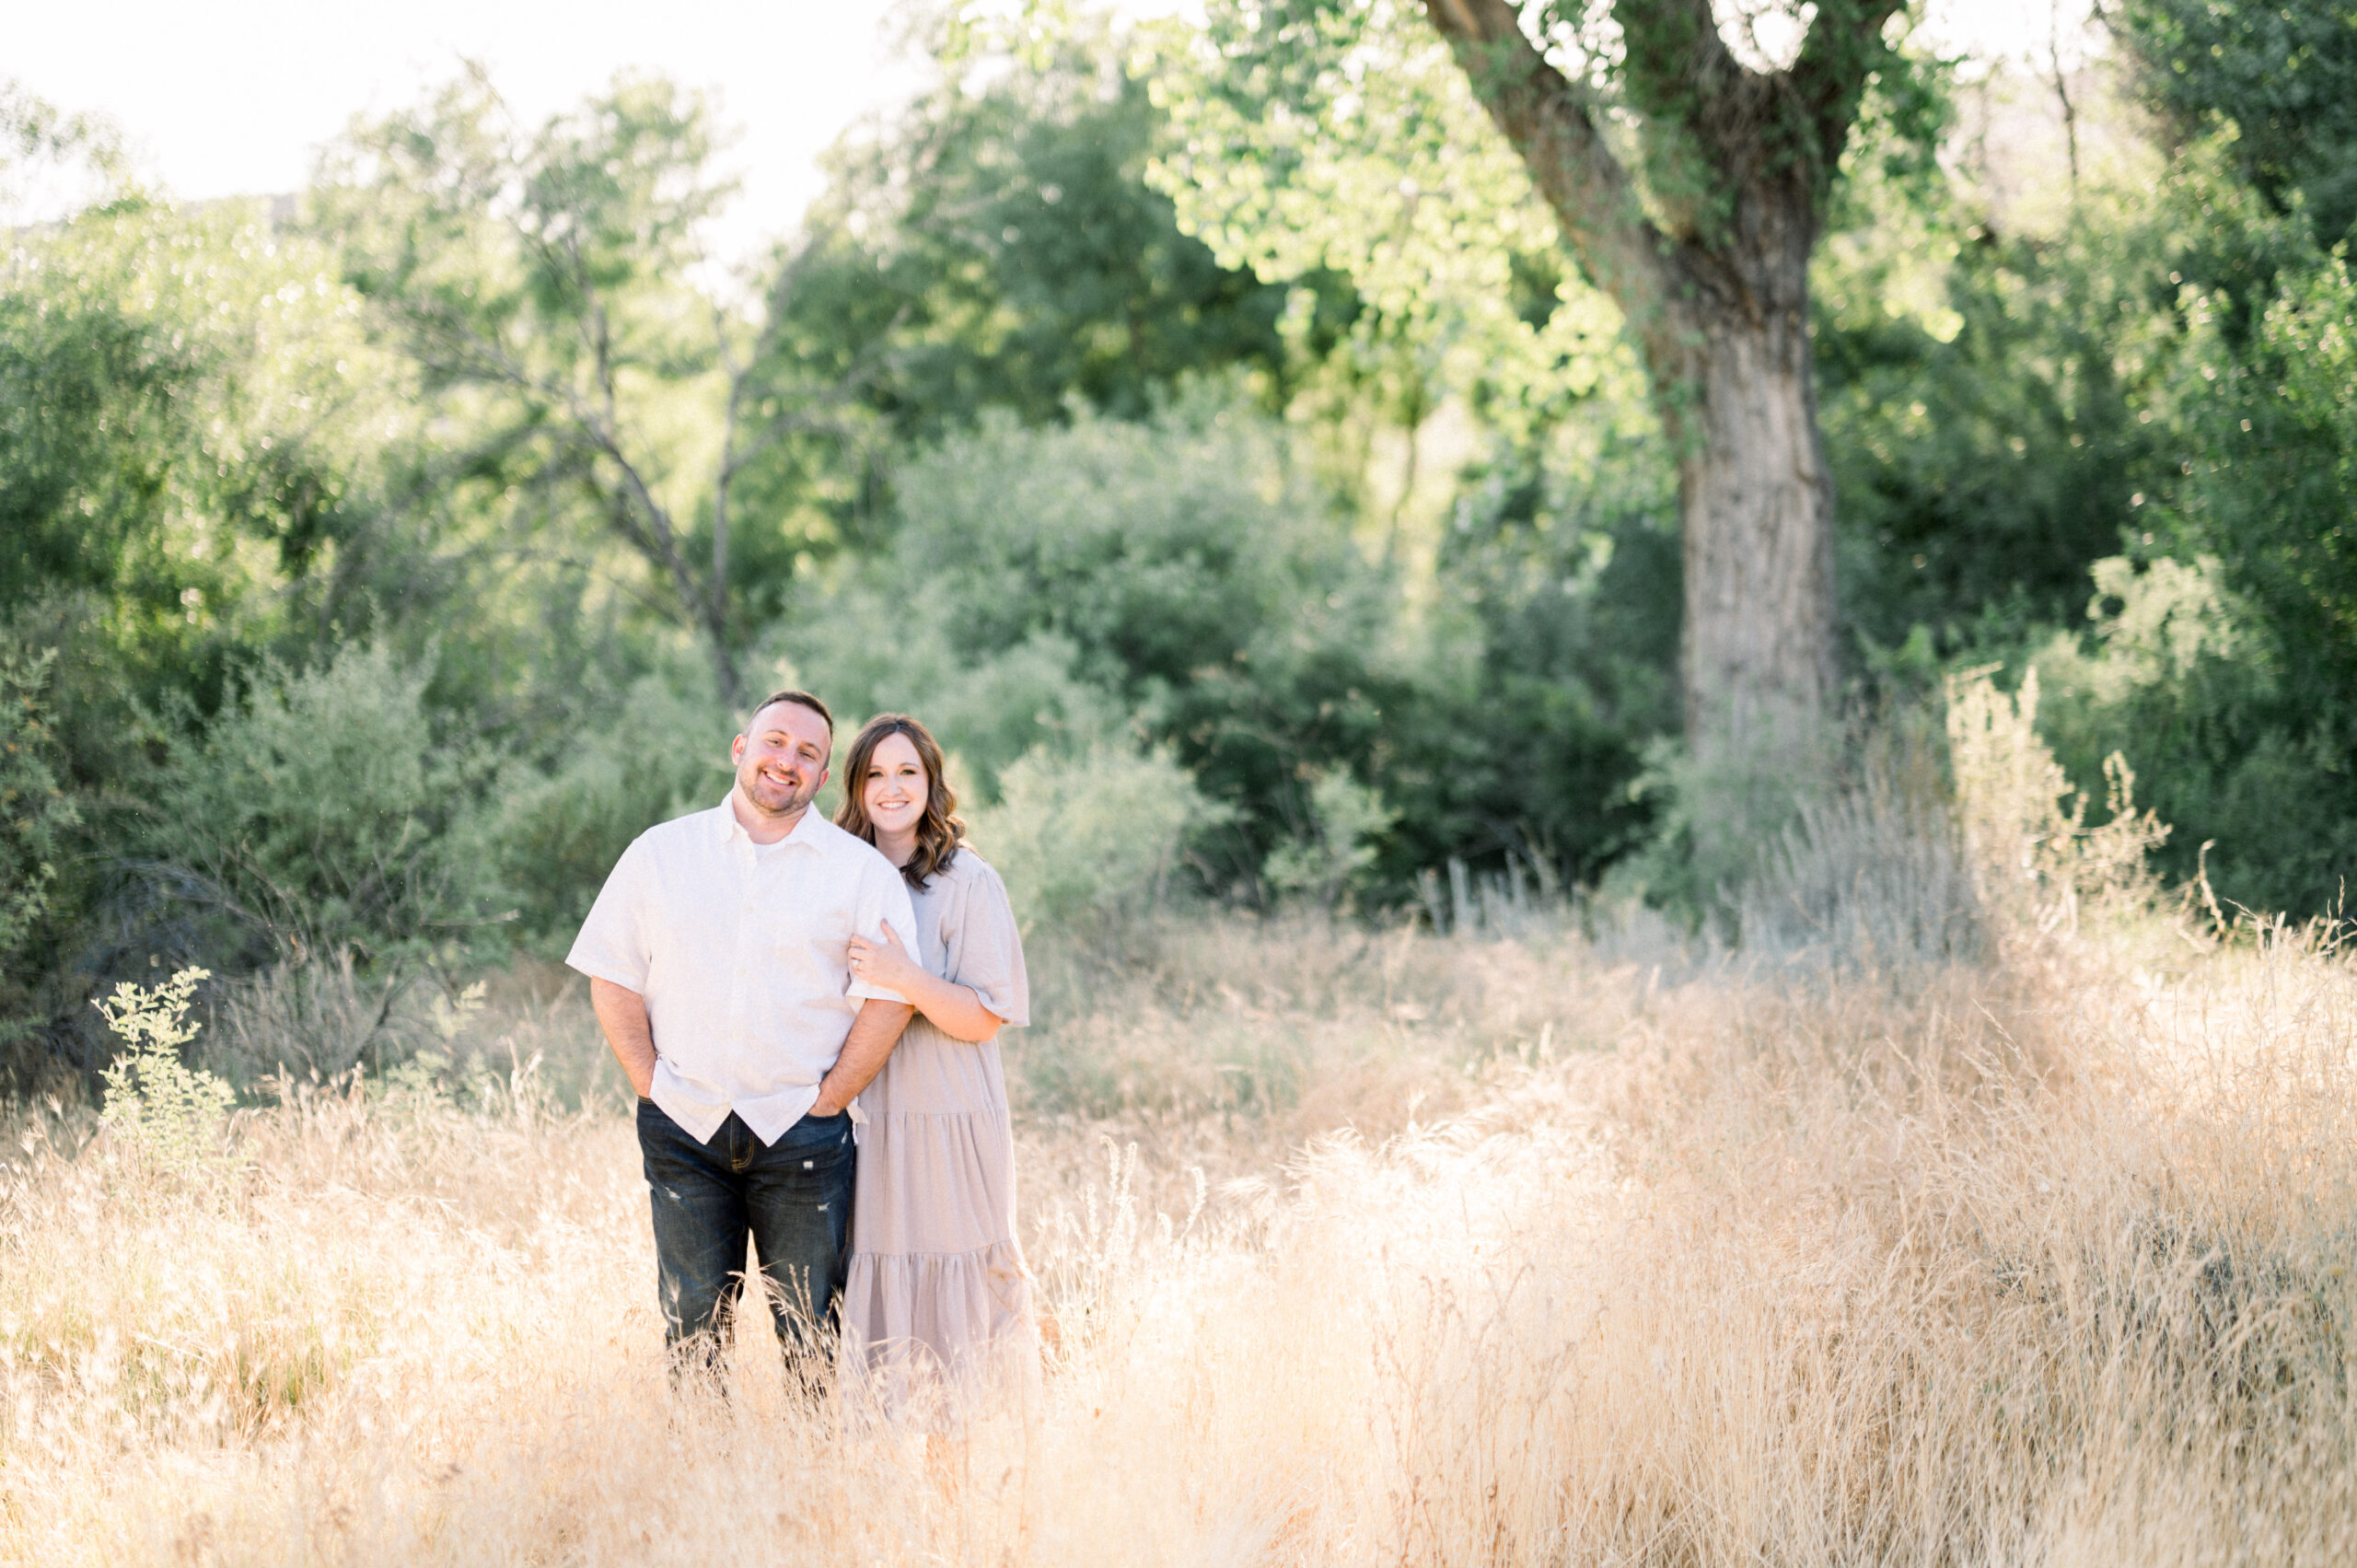 Kendra and Ryans love story started in Phoenix, so no better way to honor how they met, in the clothes they met, than a Phoenix Desert Engagement Session!